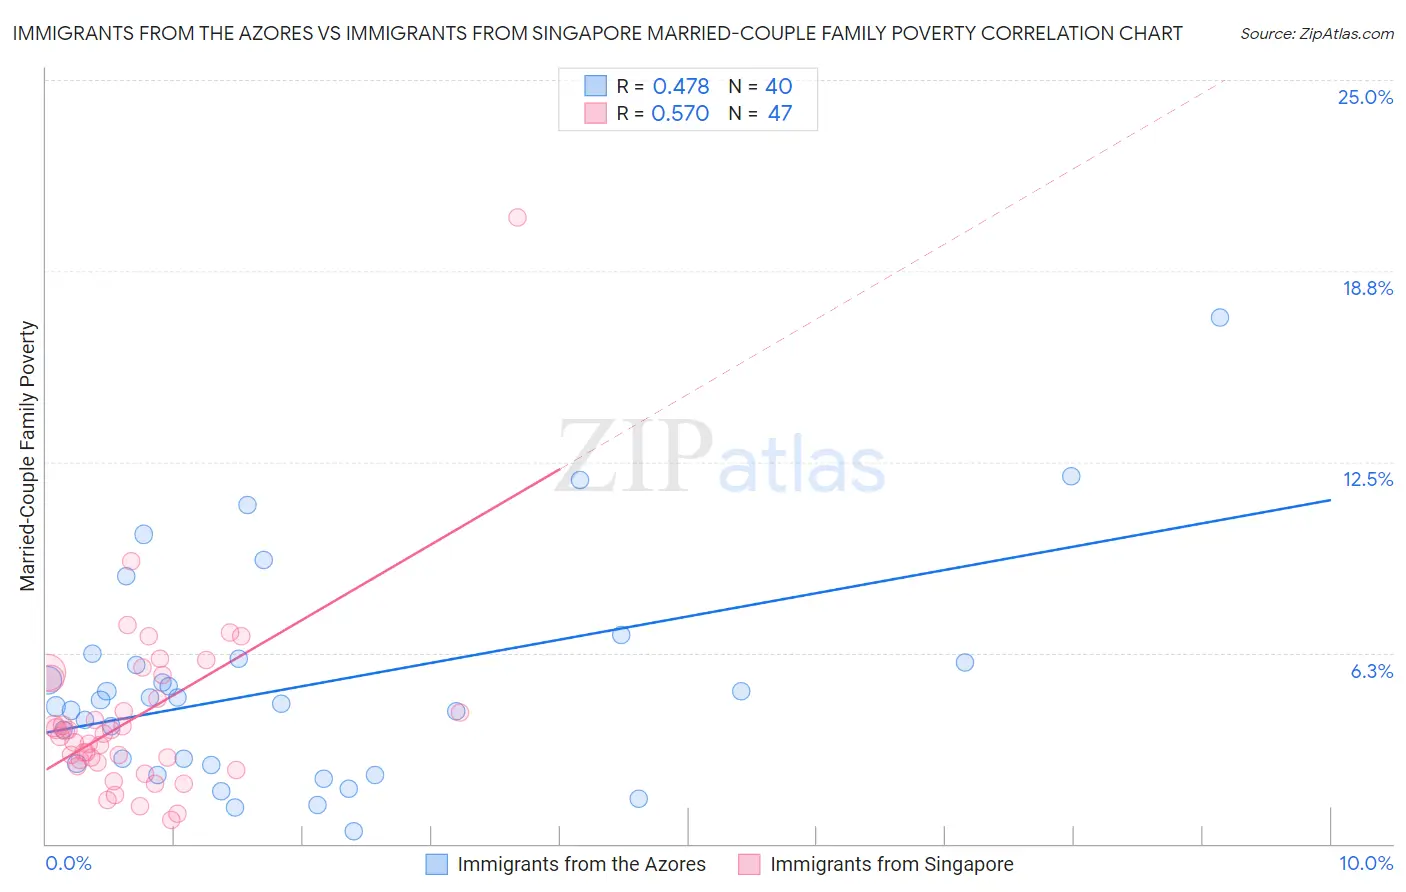 Immigrants from the Azores vs Immigrants from Singapore Married-Couple Family Poverty